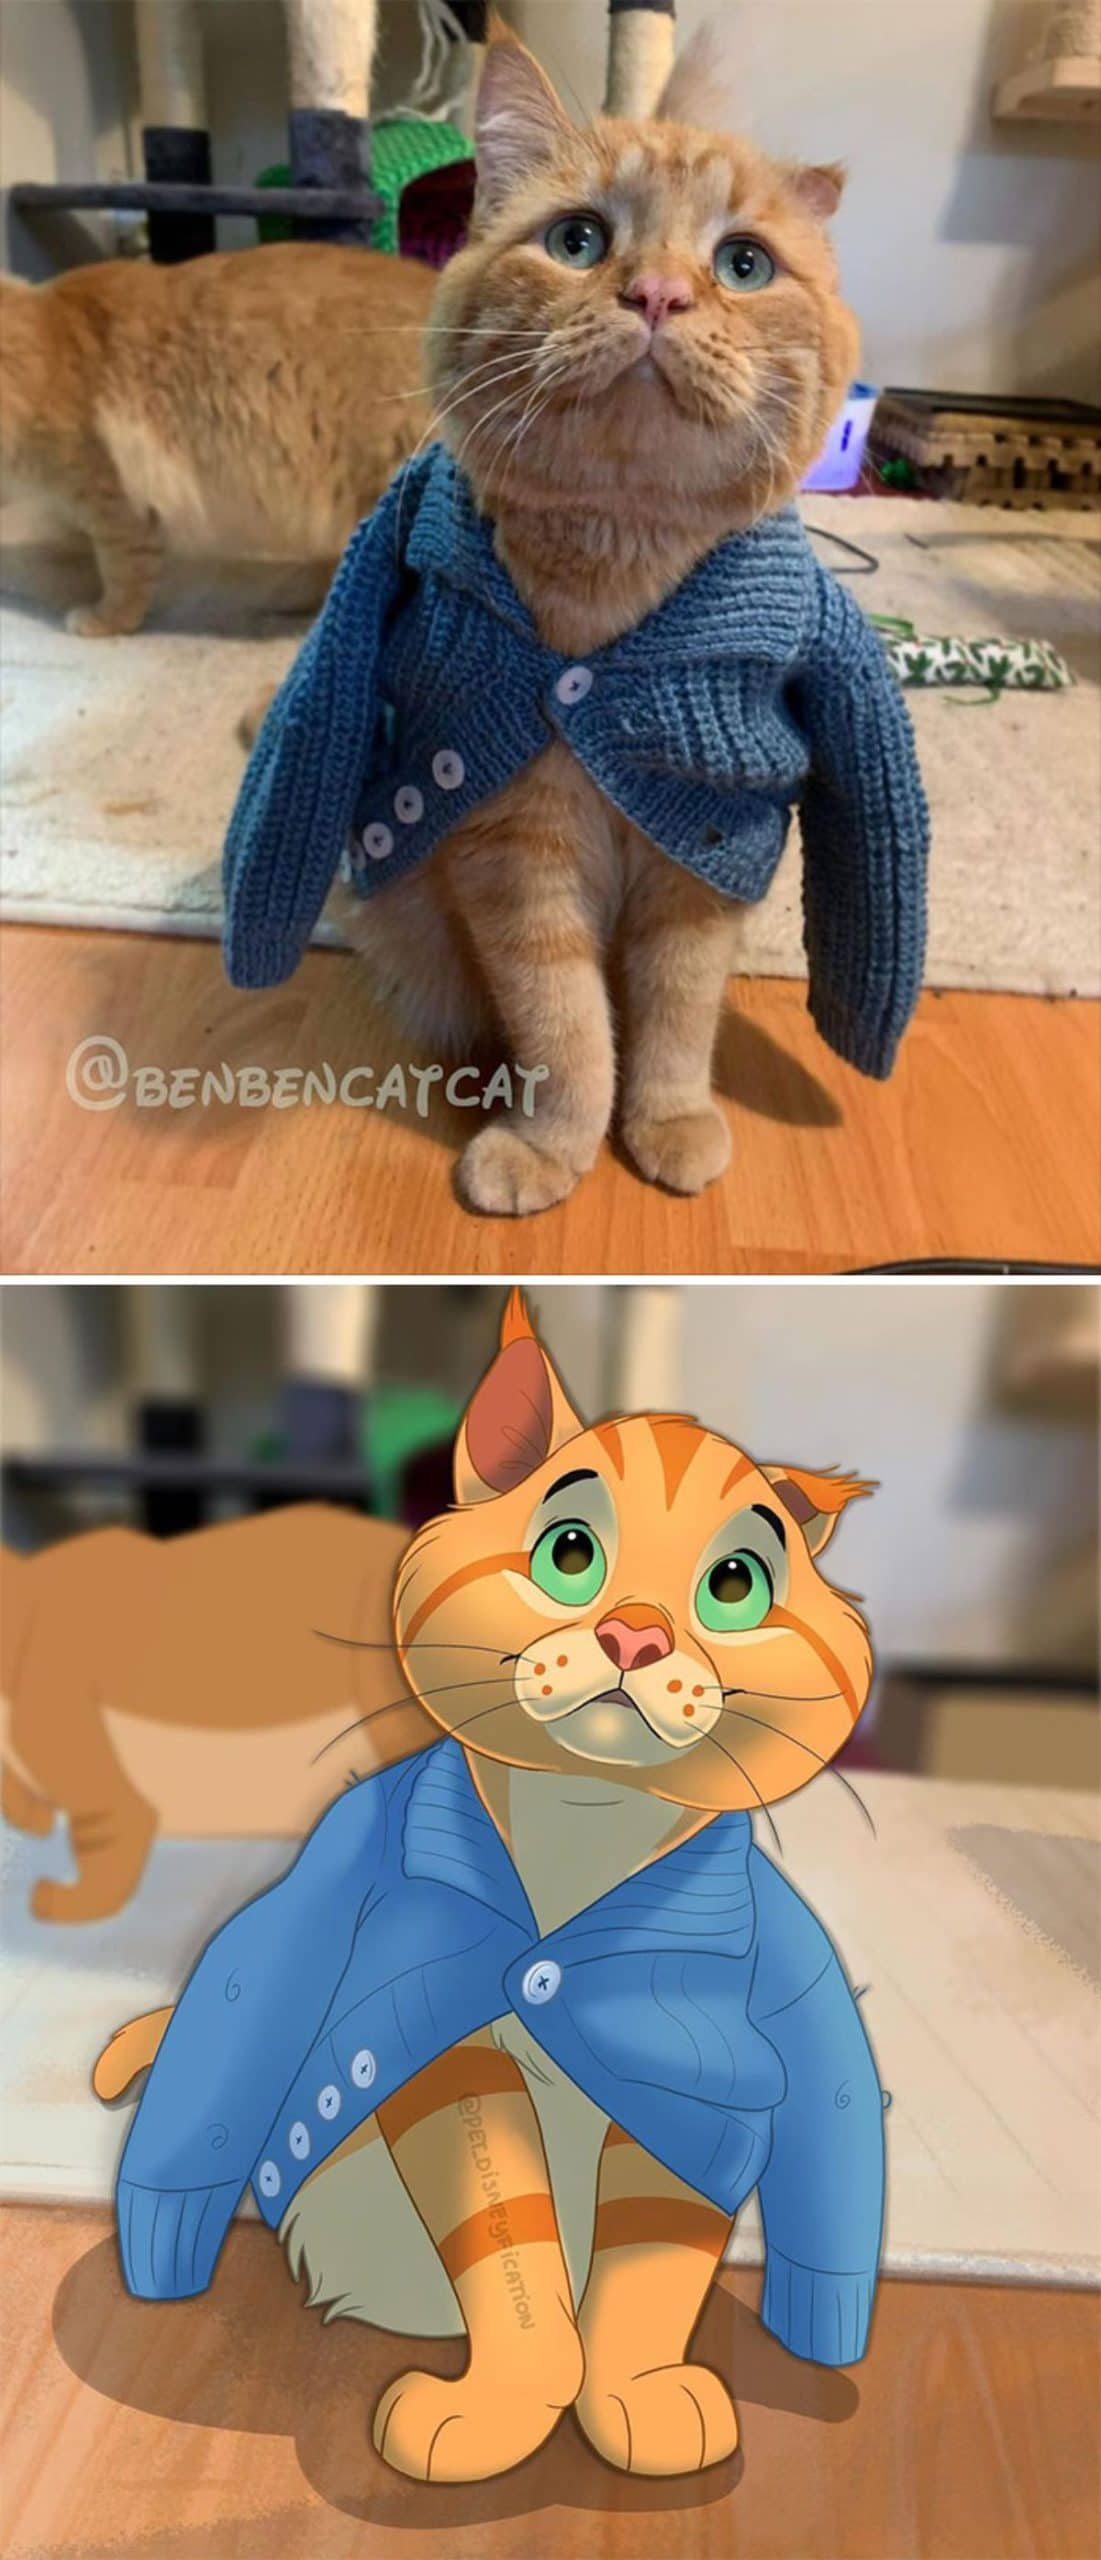 real photo and cartoon image of an orange cat wearing a blue knit sweater